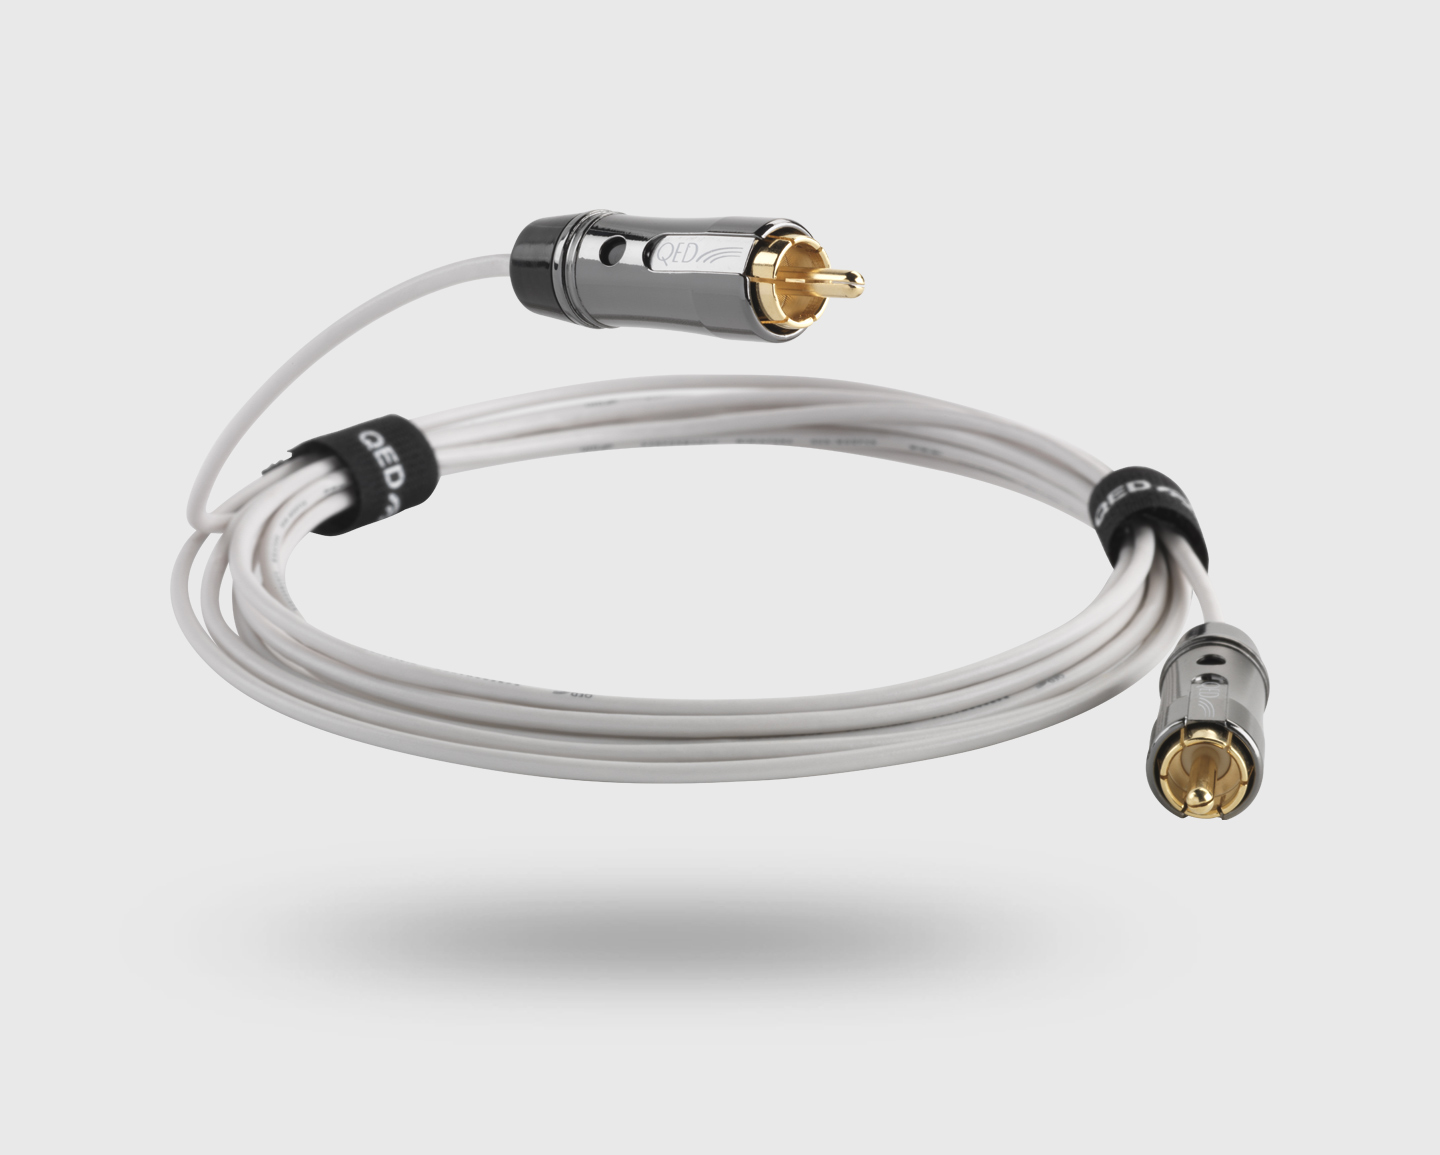 Cable Para Subwoofer Connect QED